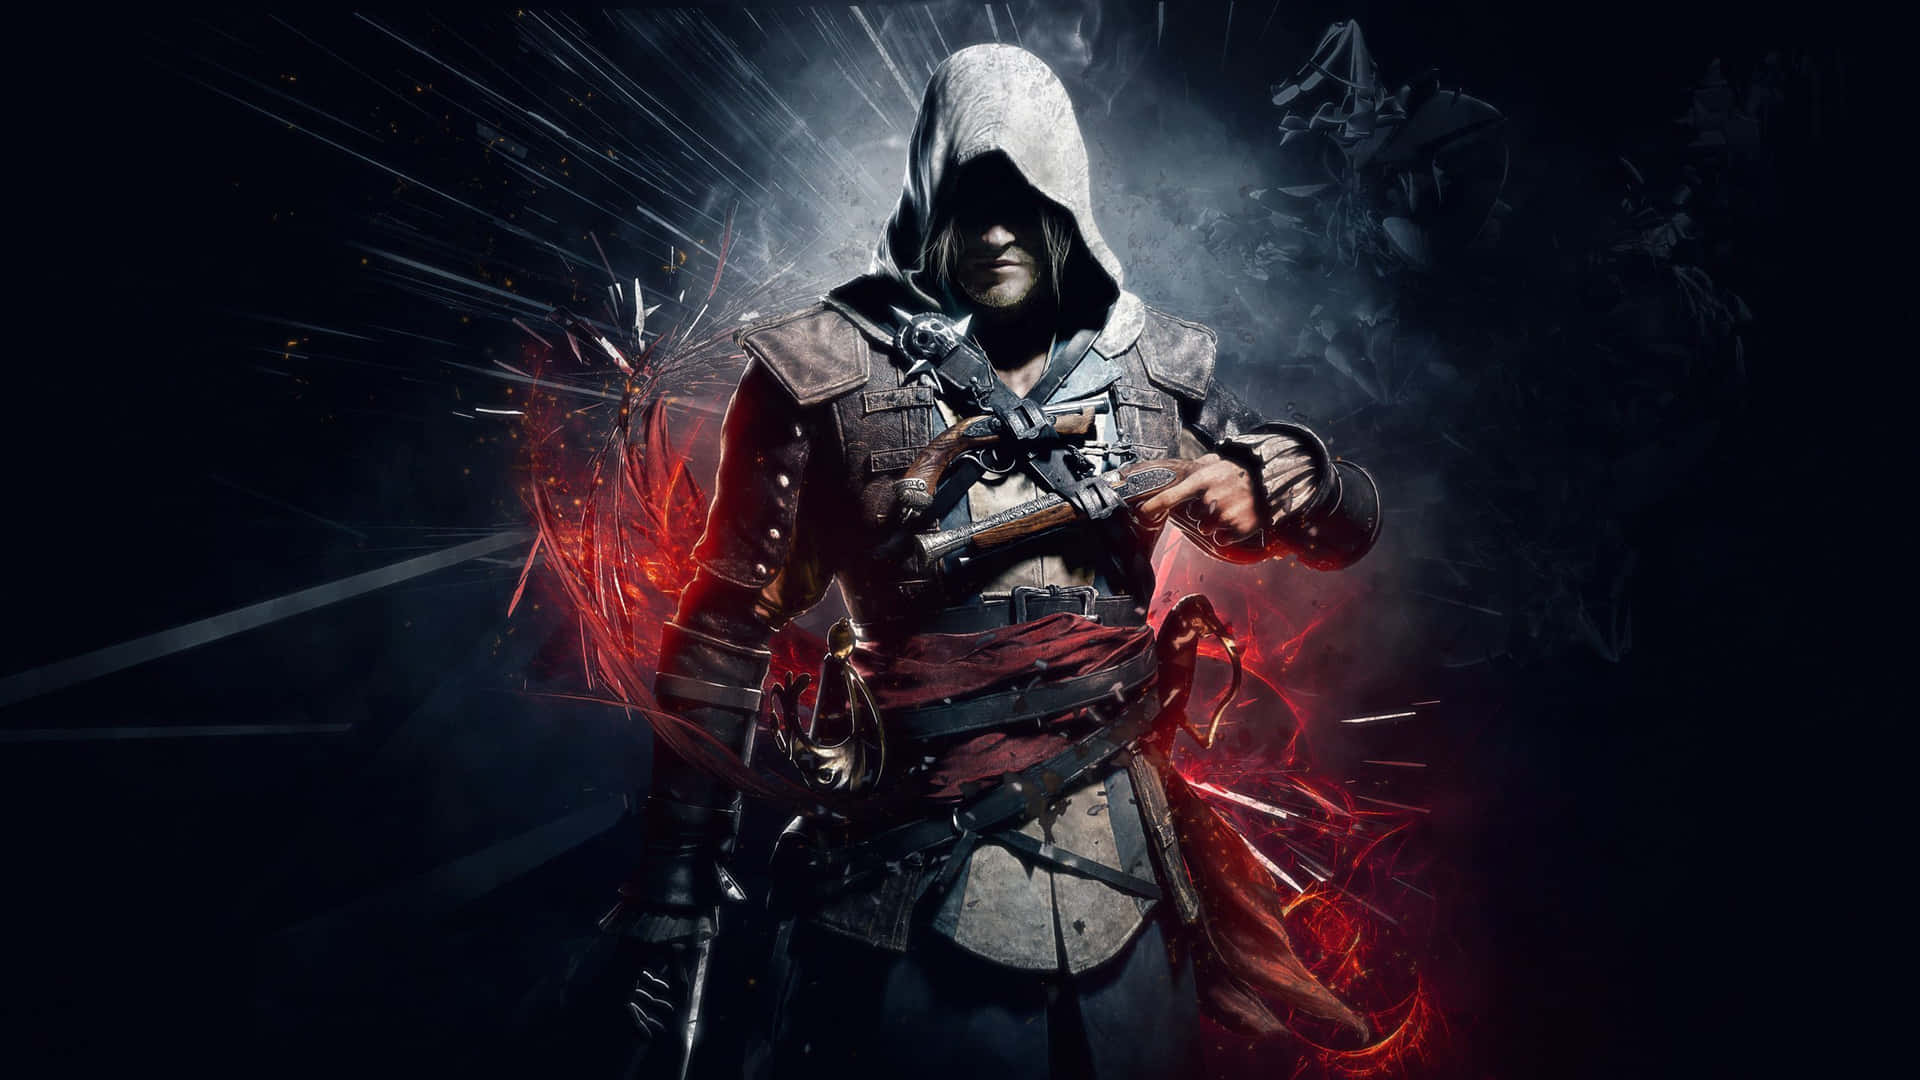 Cool Ps4 Character Edward Kenway From Assassin's Creed Iv: Black Flag Wallpaper